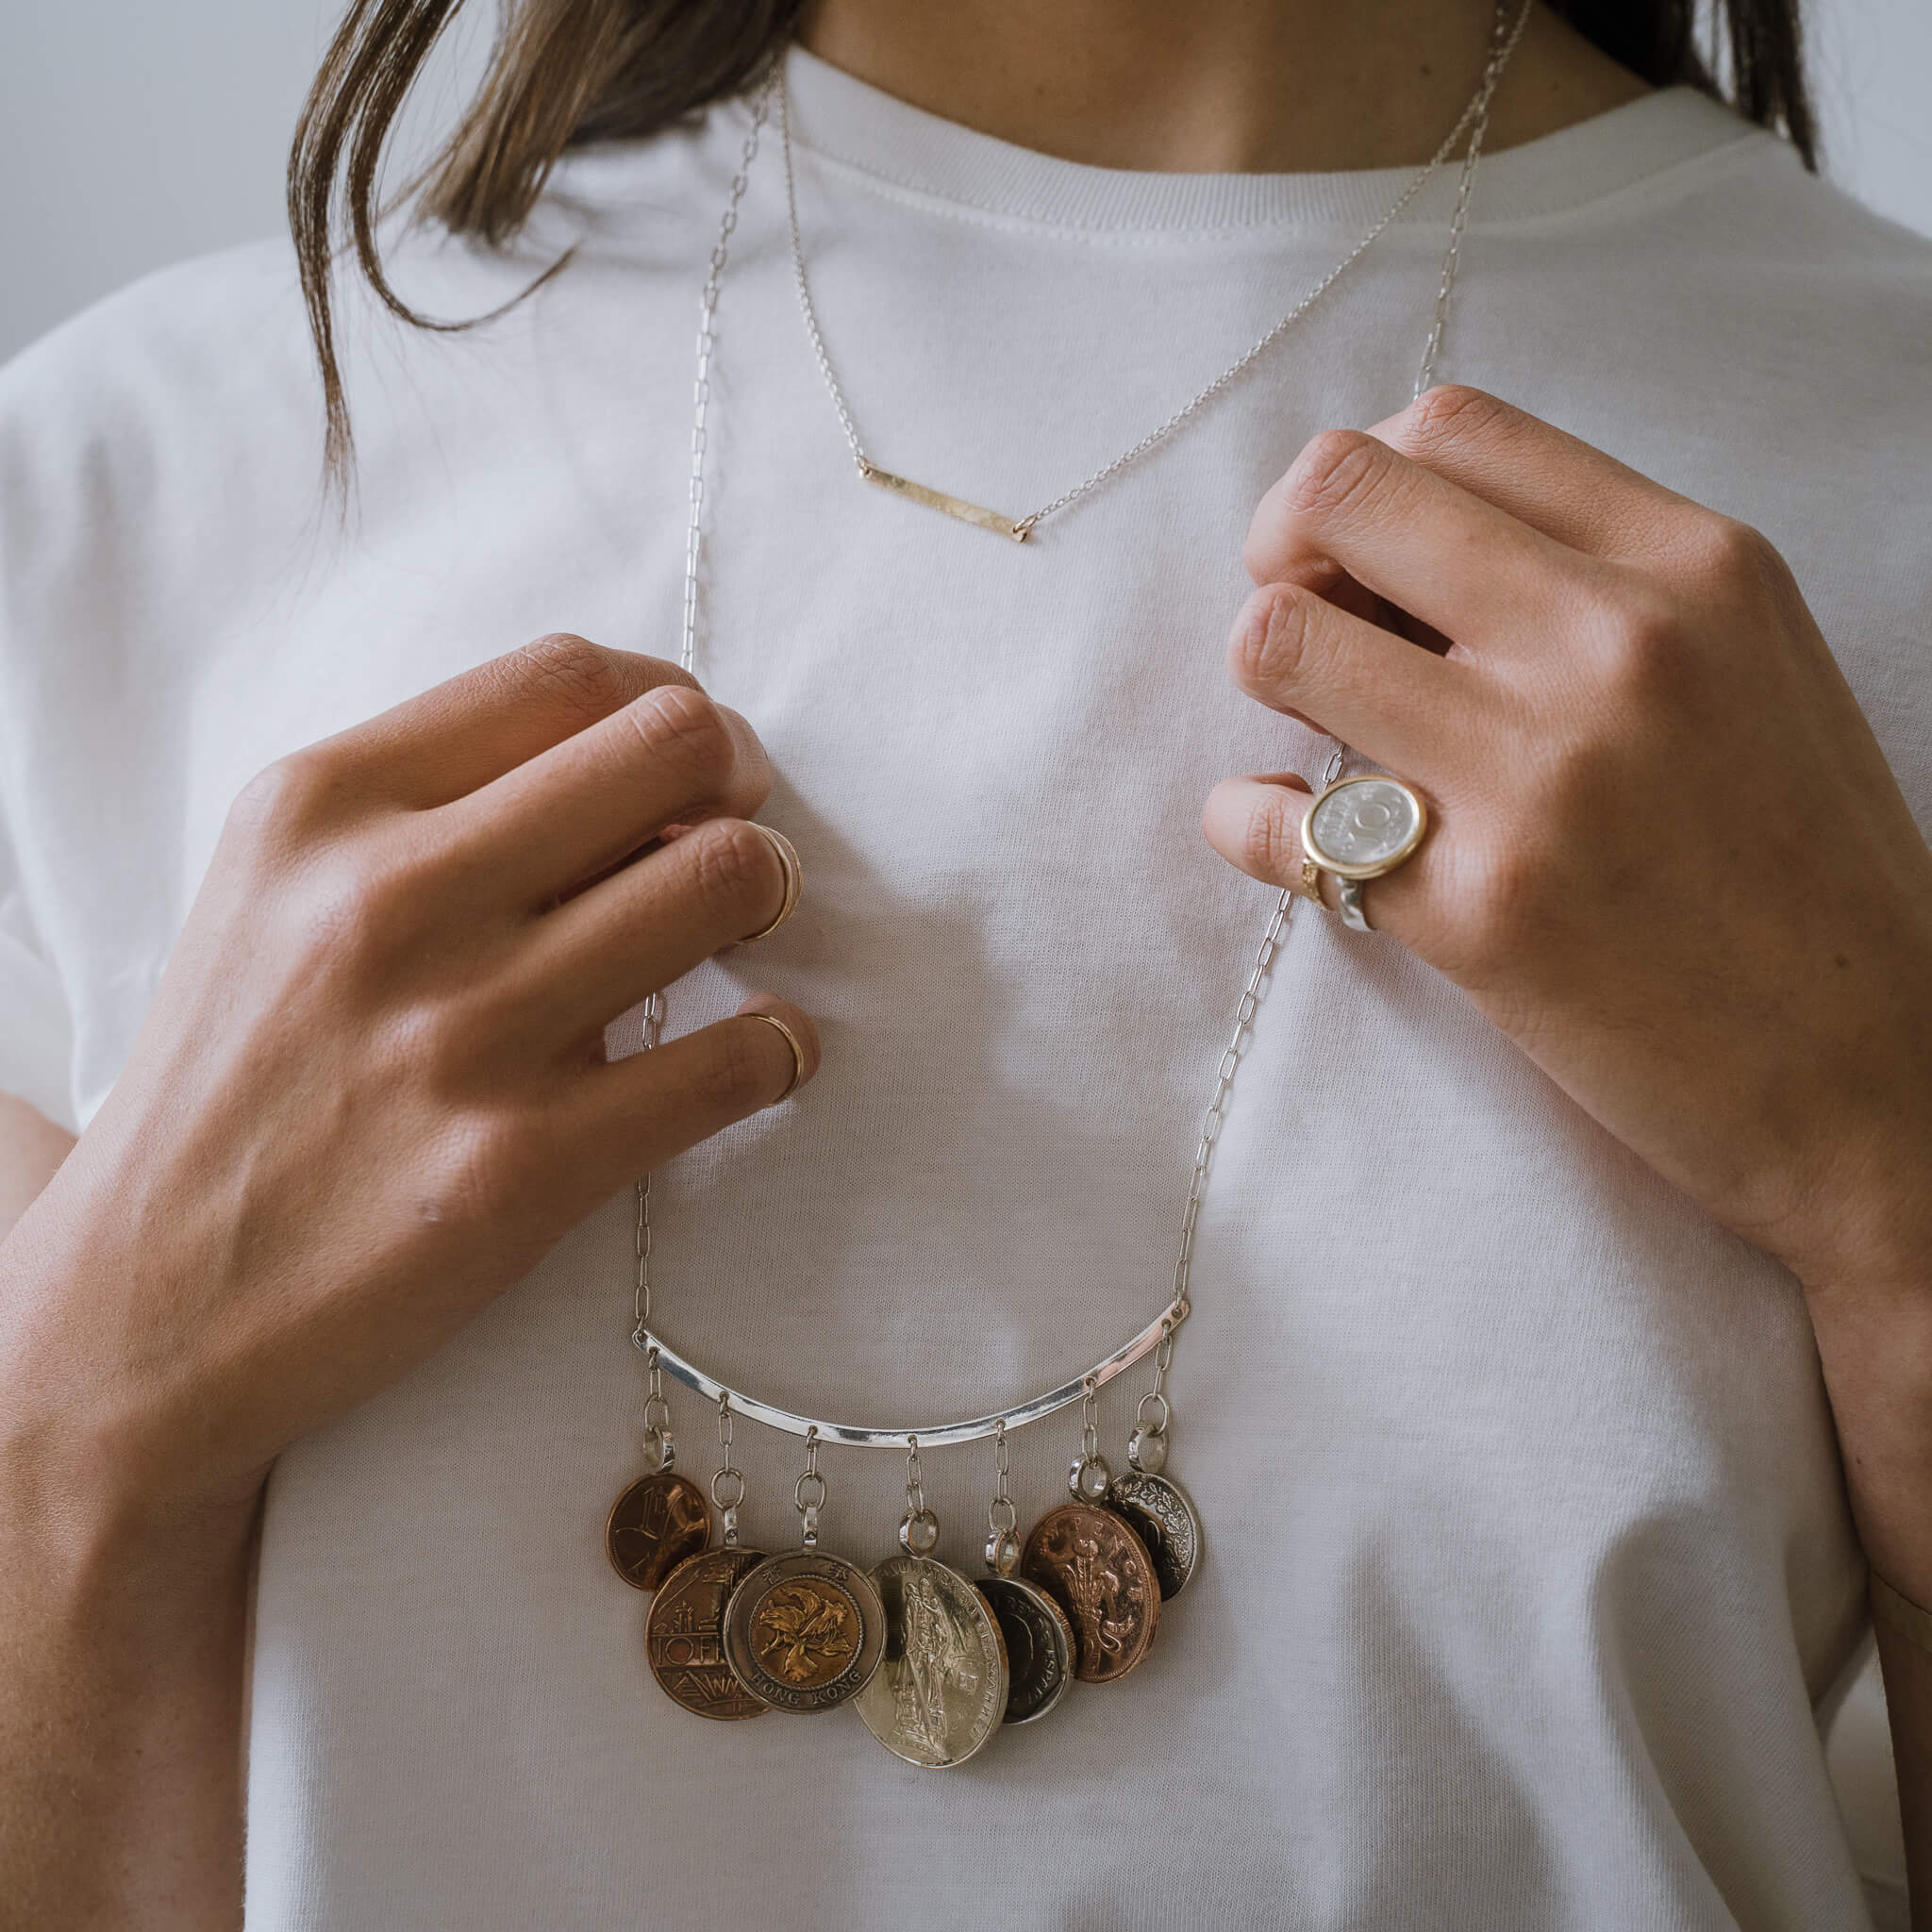 she-who-wanders-coin-necklace-15